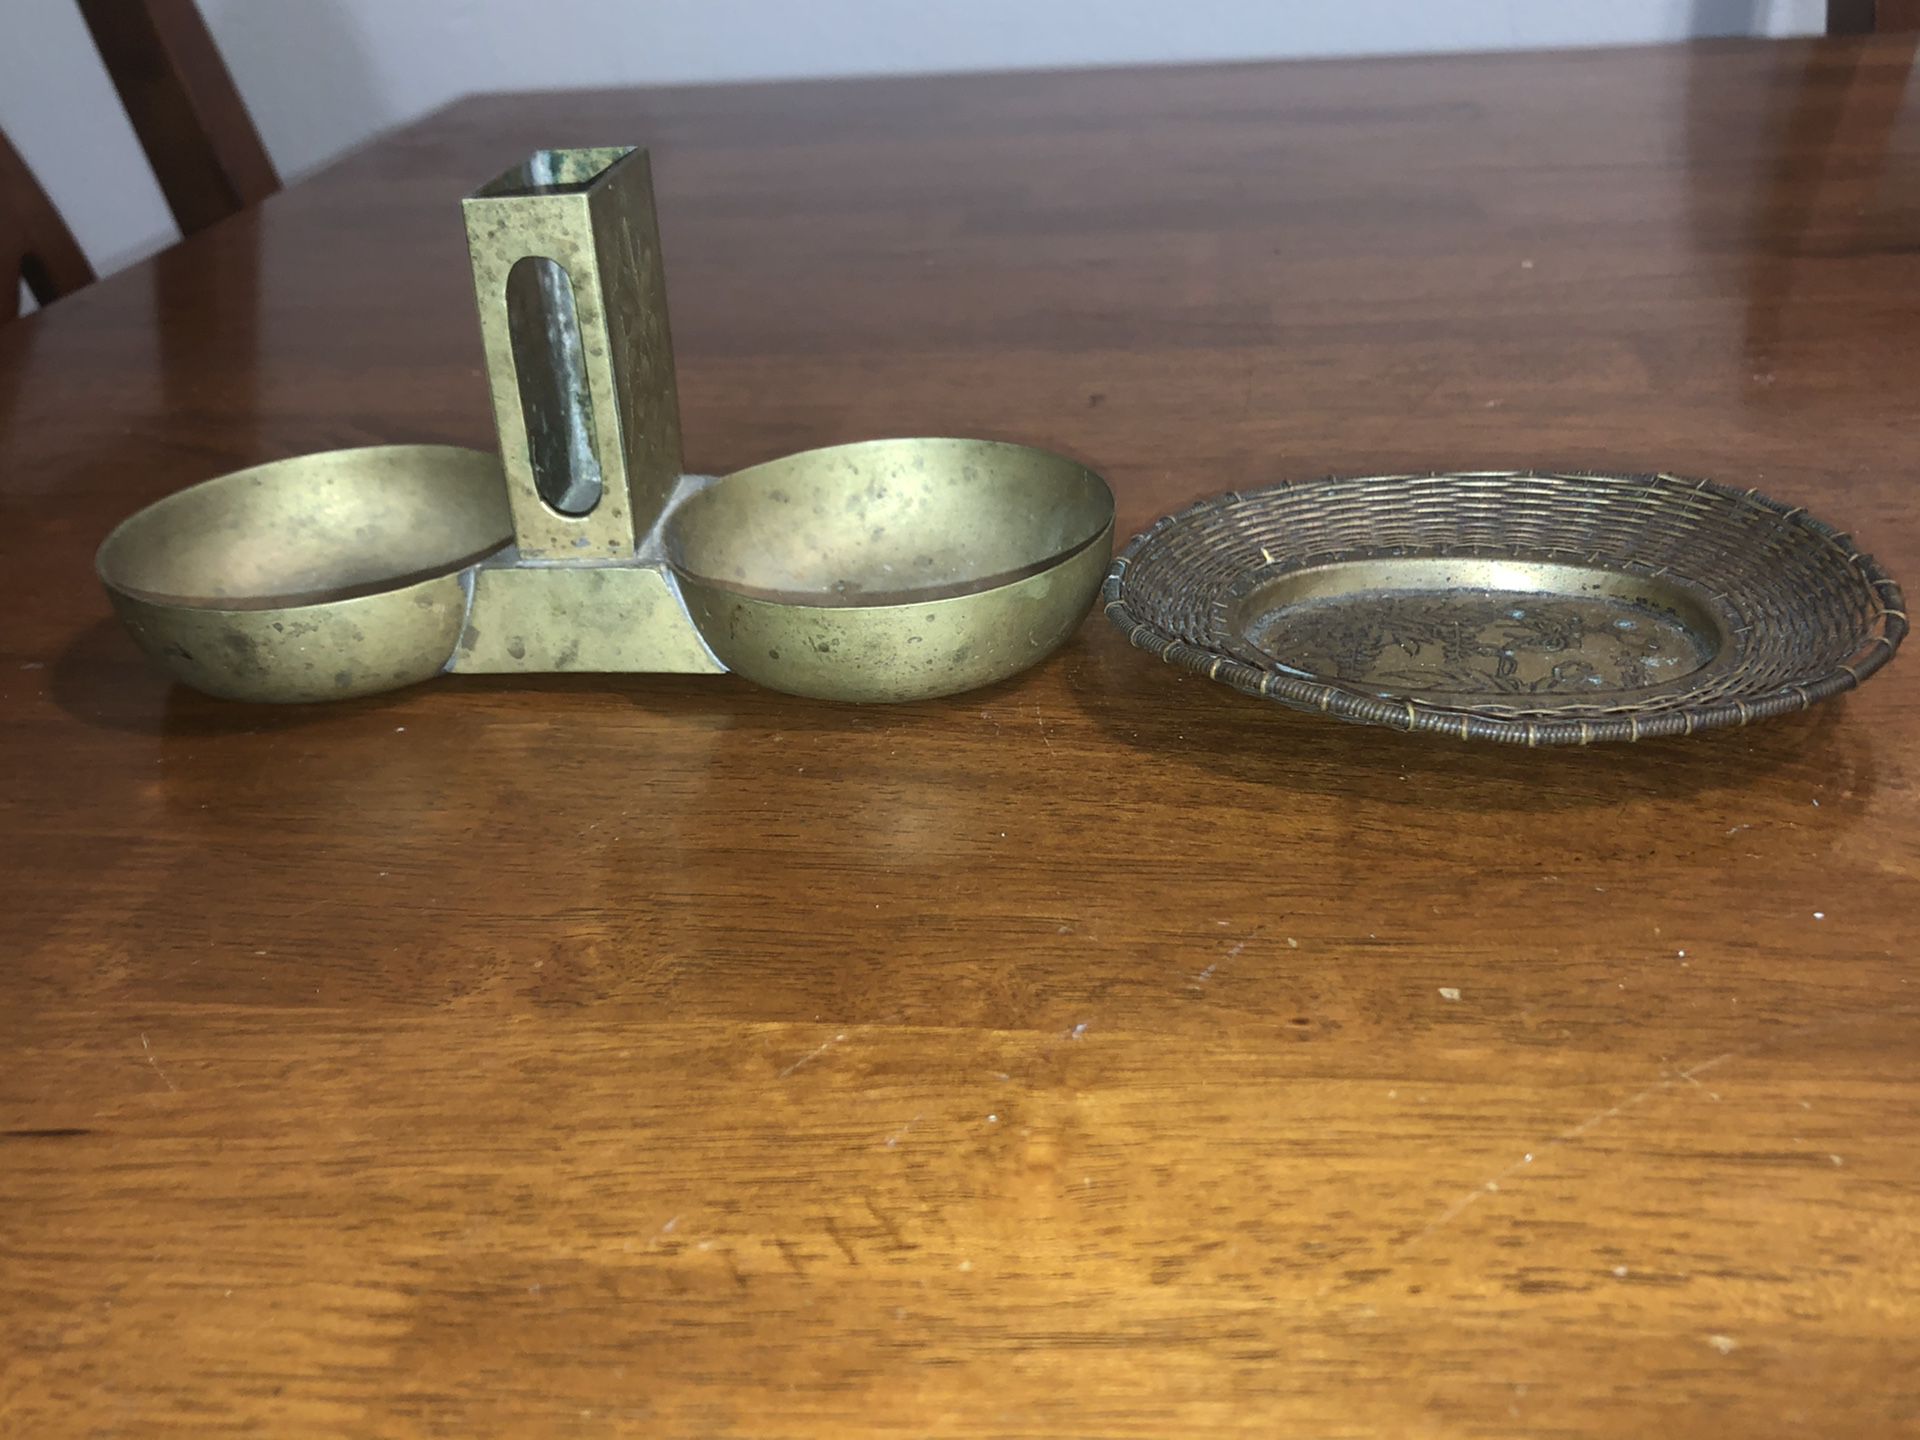 TWO ANTIQUE CHINESE ASHTRAYS ONE IS A DUAL ASHTRAY WITH A MATCH BOX HOLDER IN THE CENTER.